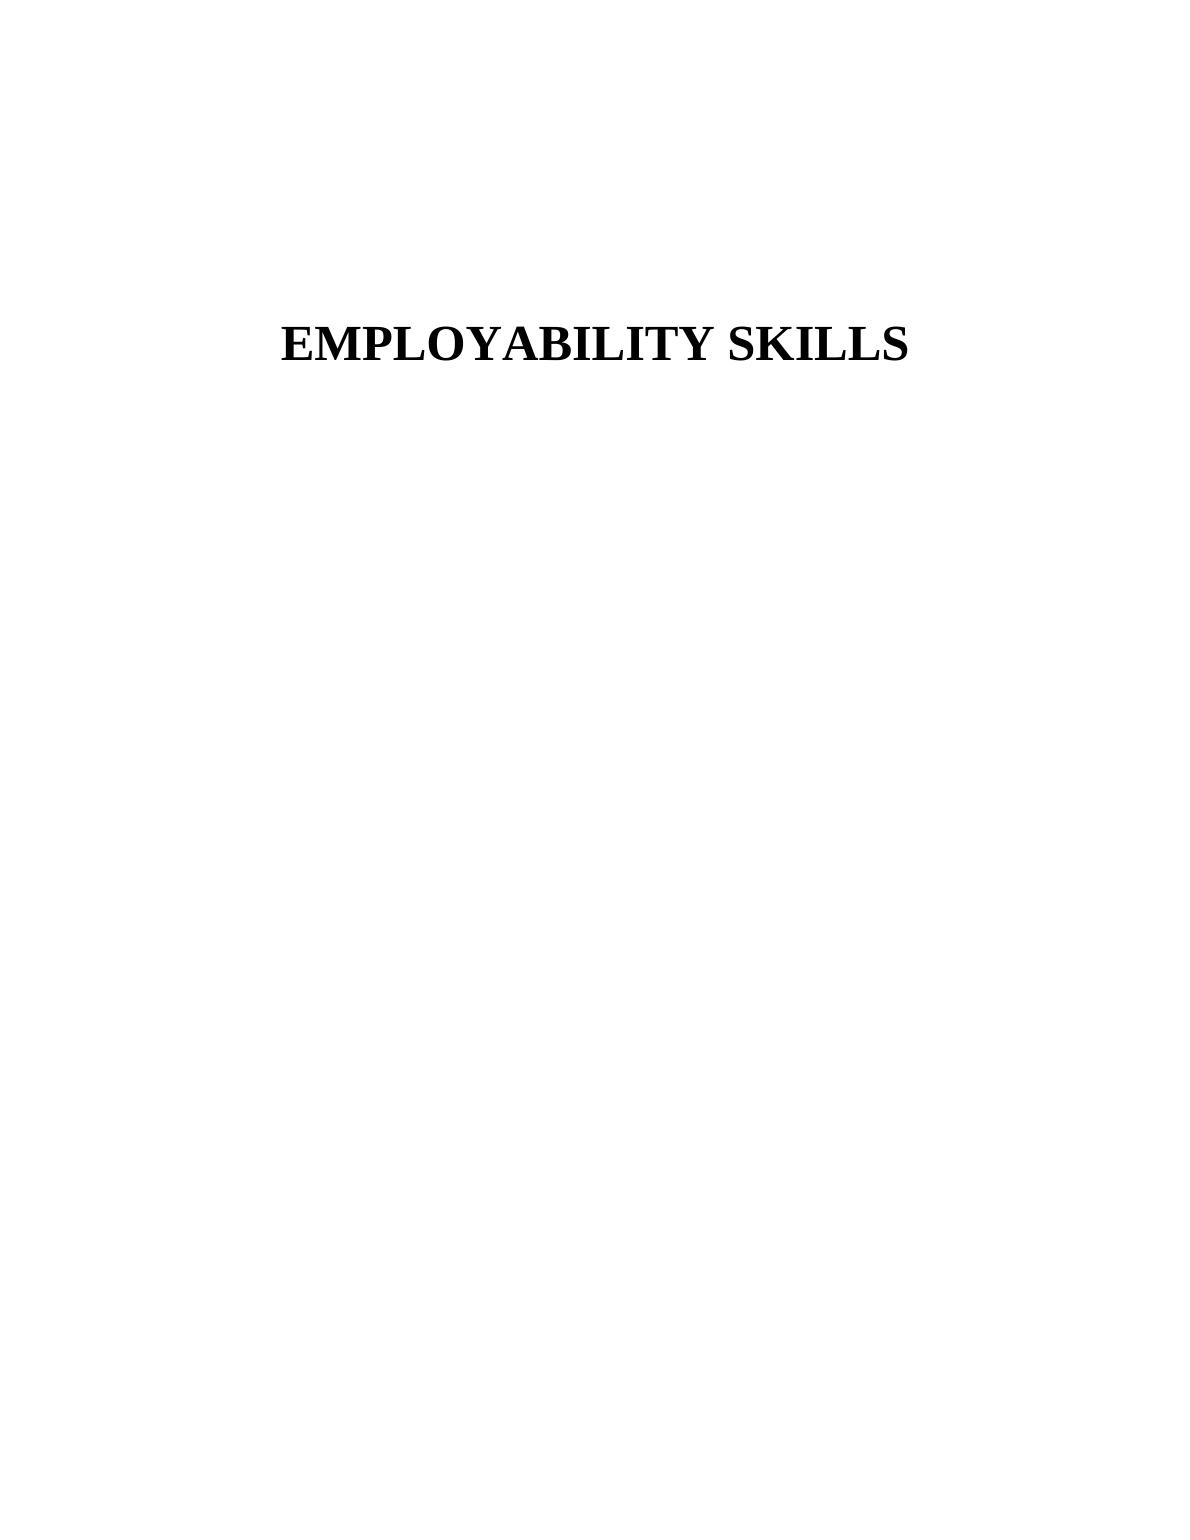 EMPLOYABILITY SKILLS TABLE OF CONTENTS INTRODUCTION 3 TASK 13 1.1 Setting of own responsibilities and performnace objectives 3 1.2 Evaluating employee effectiveness 4 1.3 Motivational methods for impr_1